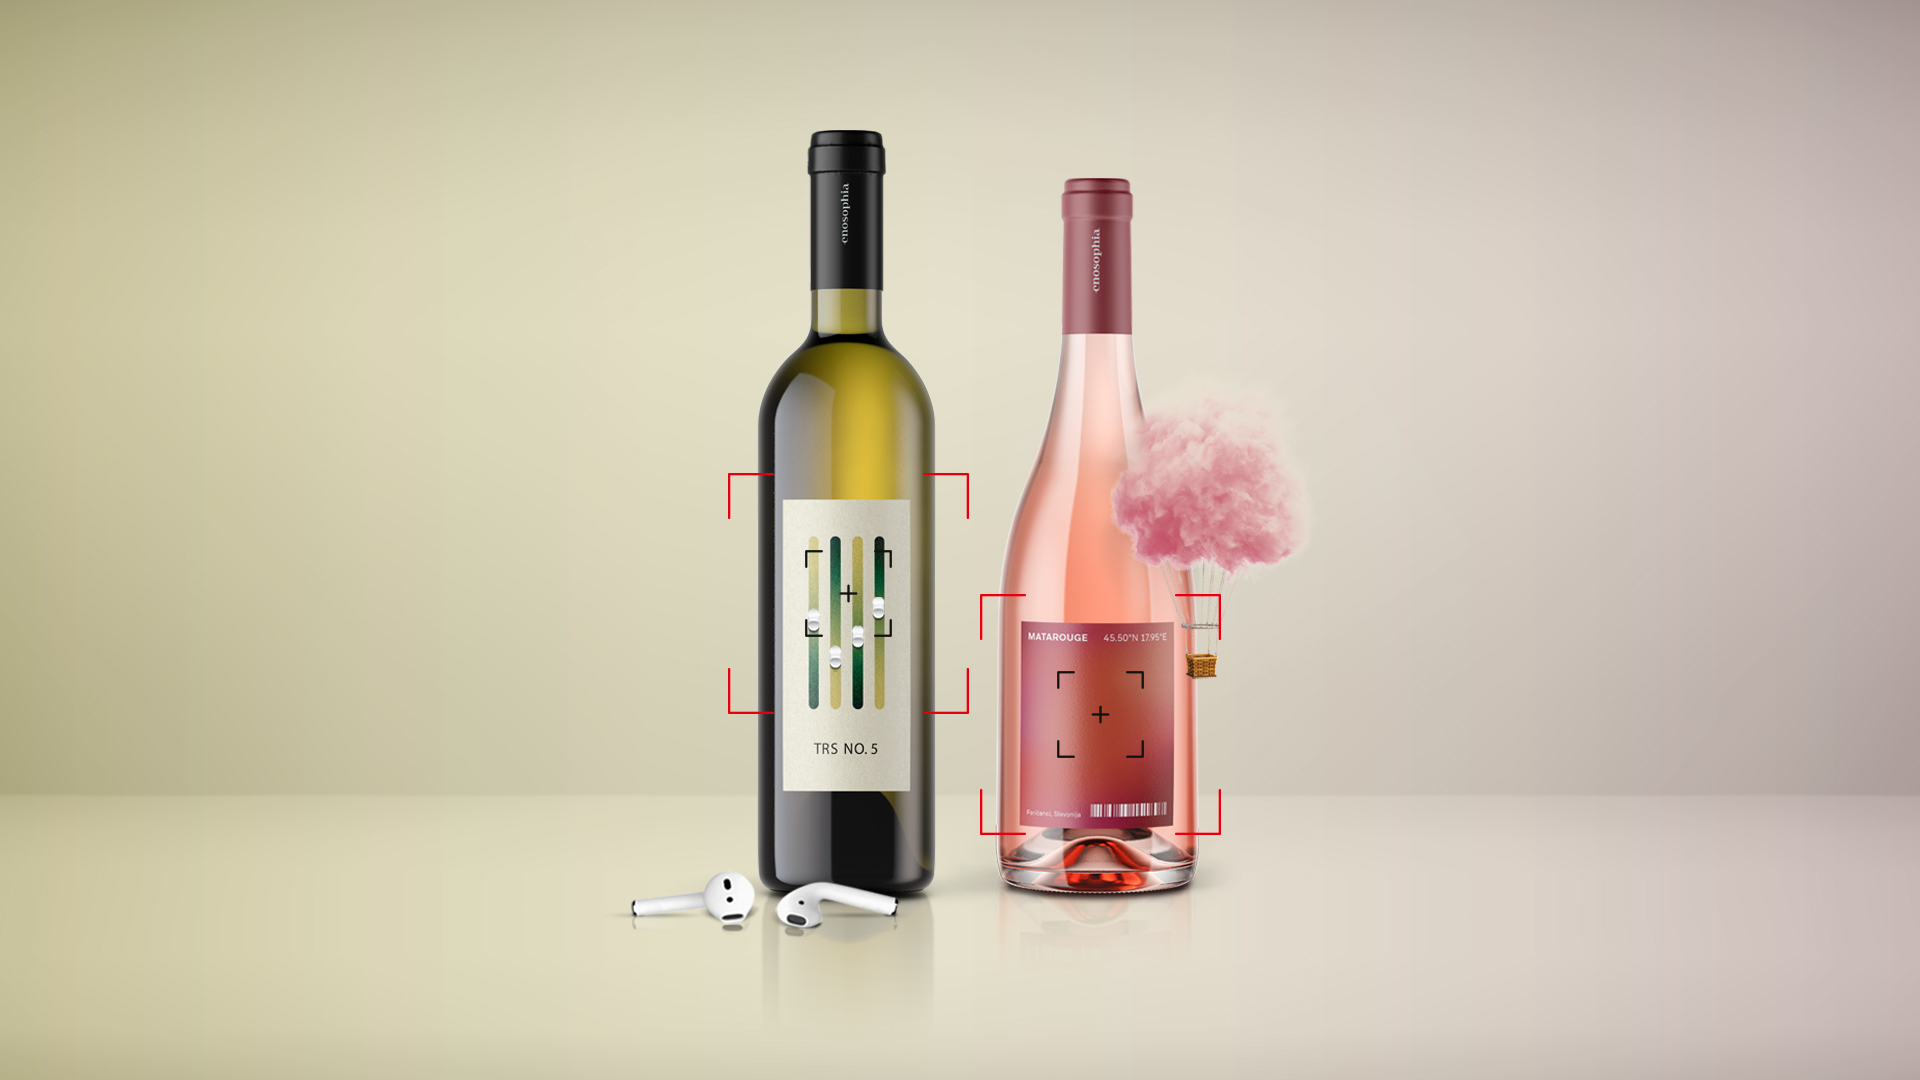 Enosophia Wines With an Interactive Label That Plays Music